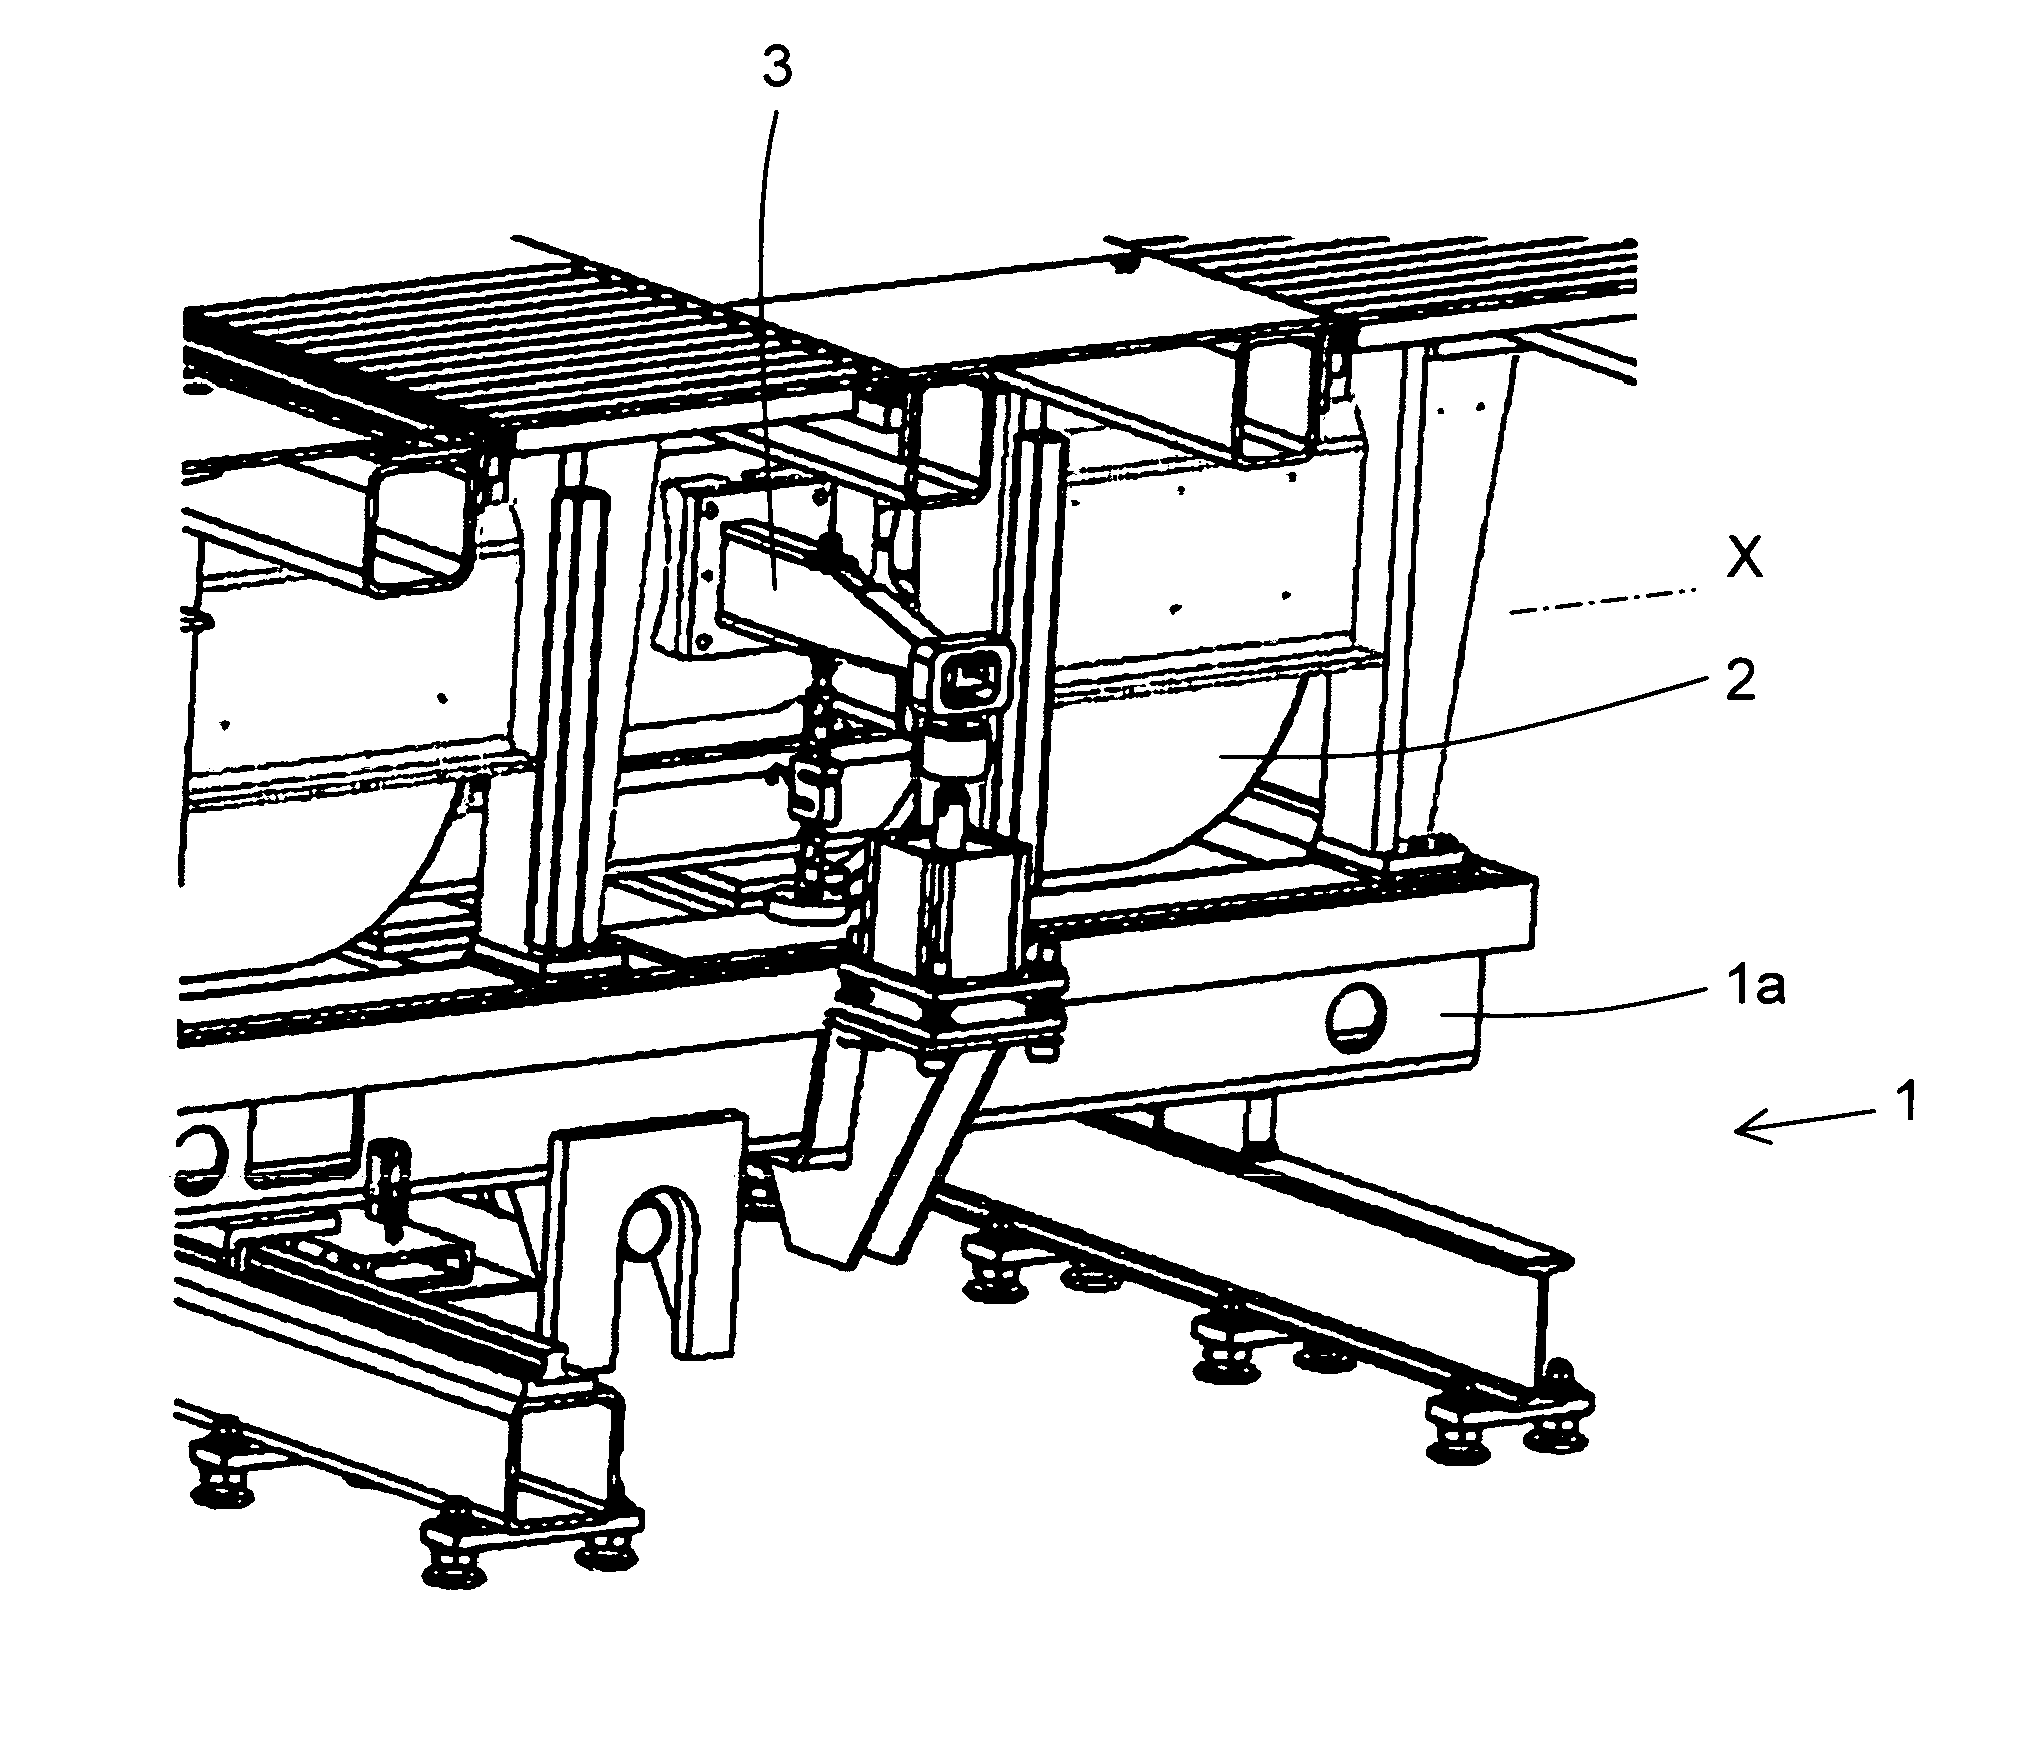 Test stand with an apparatus for calibrating a force-measuring device